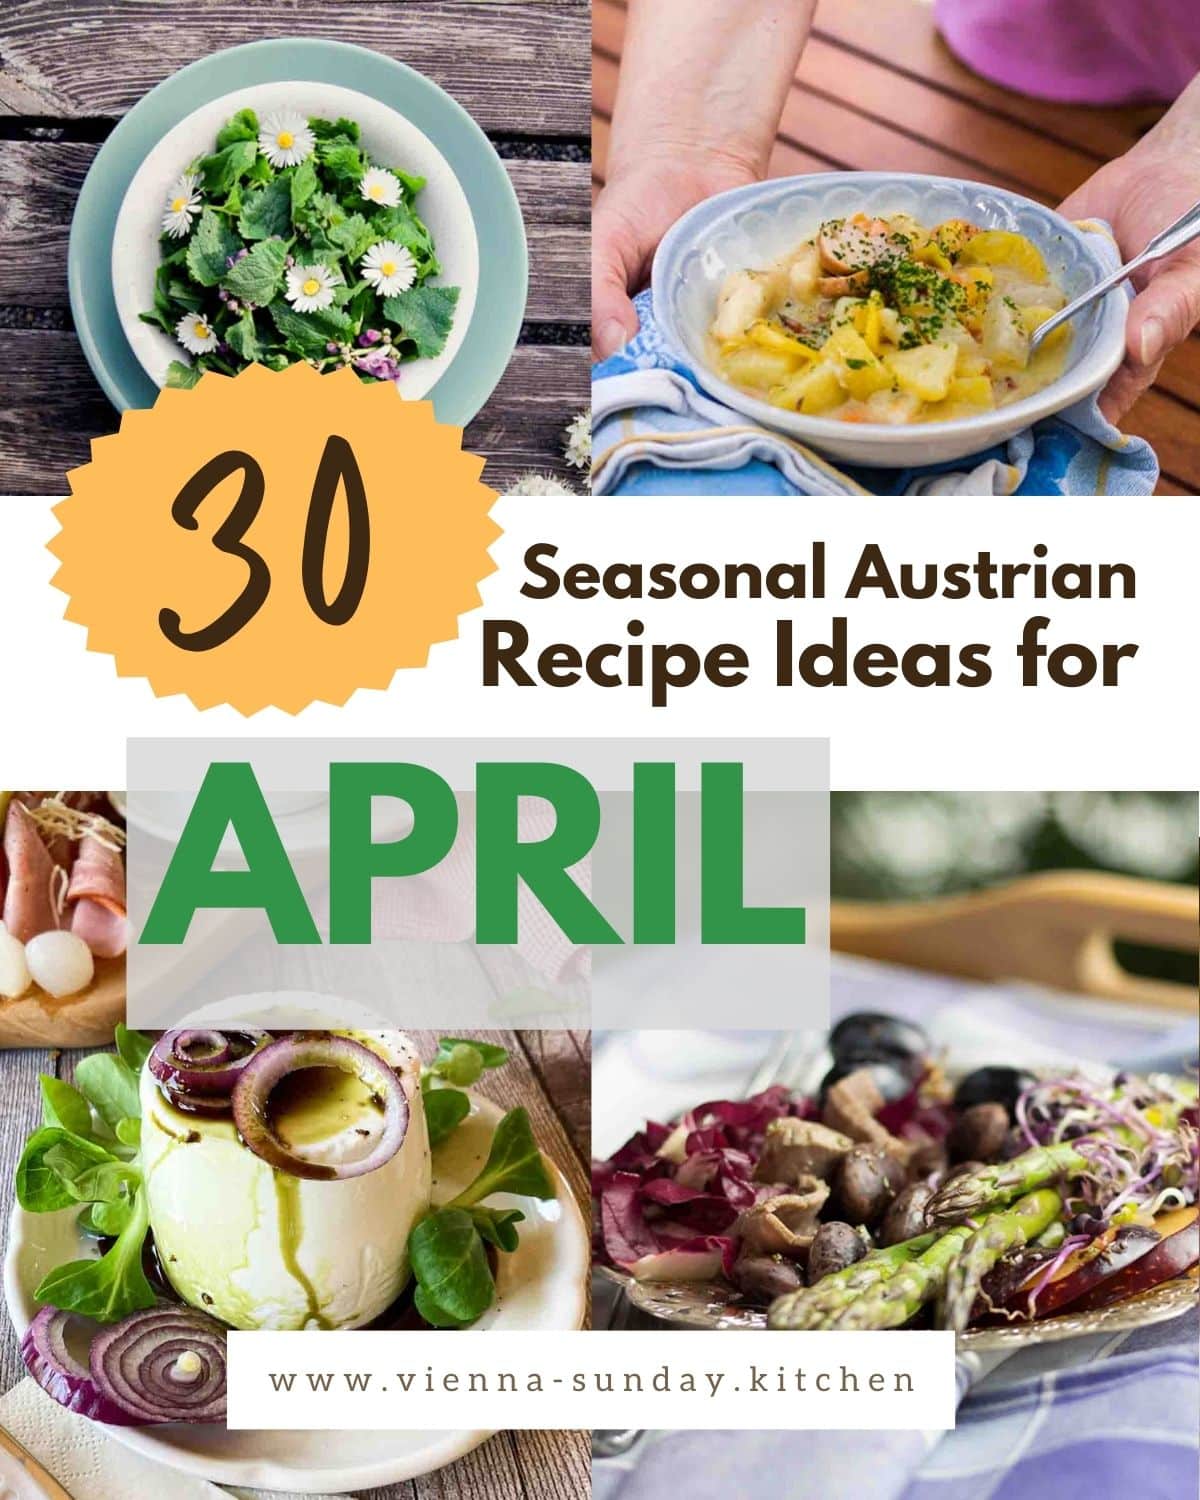 Pinterest Pin with Title: 30 seasonal recipe ideas from Austria & Germany for APRIL.